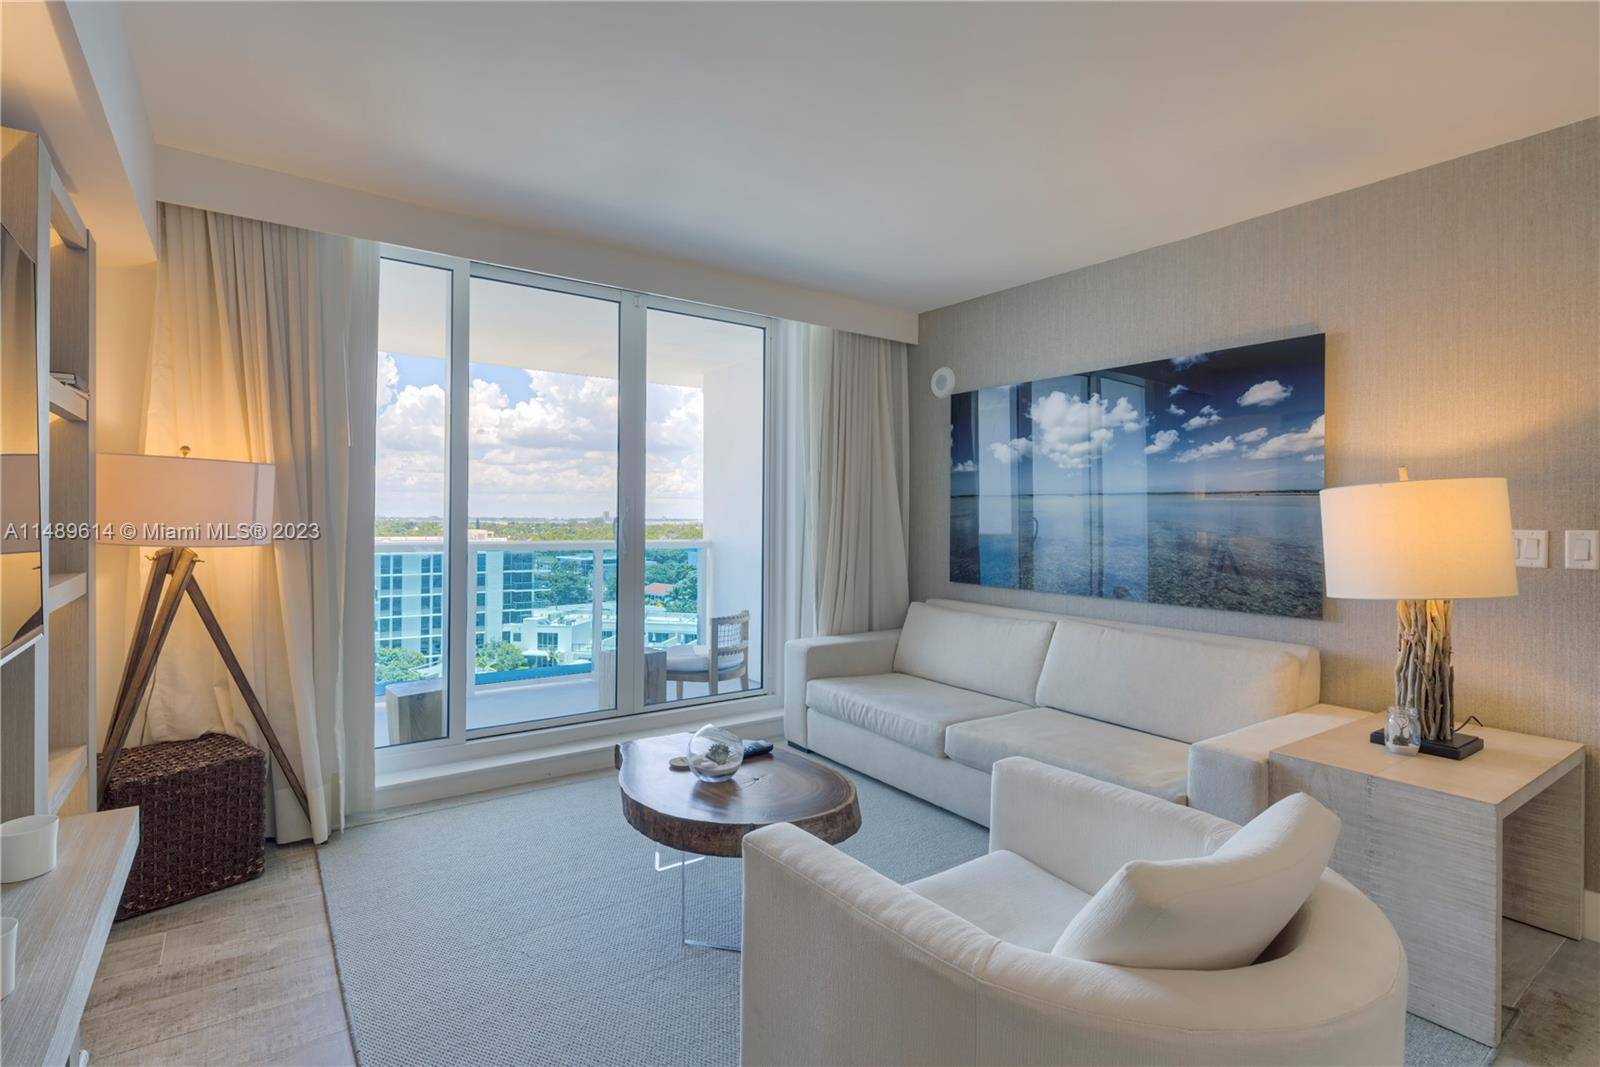 Embark on a lifestyle of luxury in this fully furnished and stocked 2 bed, 2 bath condo, featuring mesmerizing skyline views.